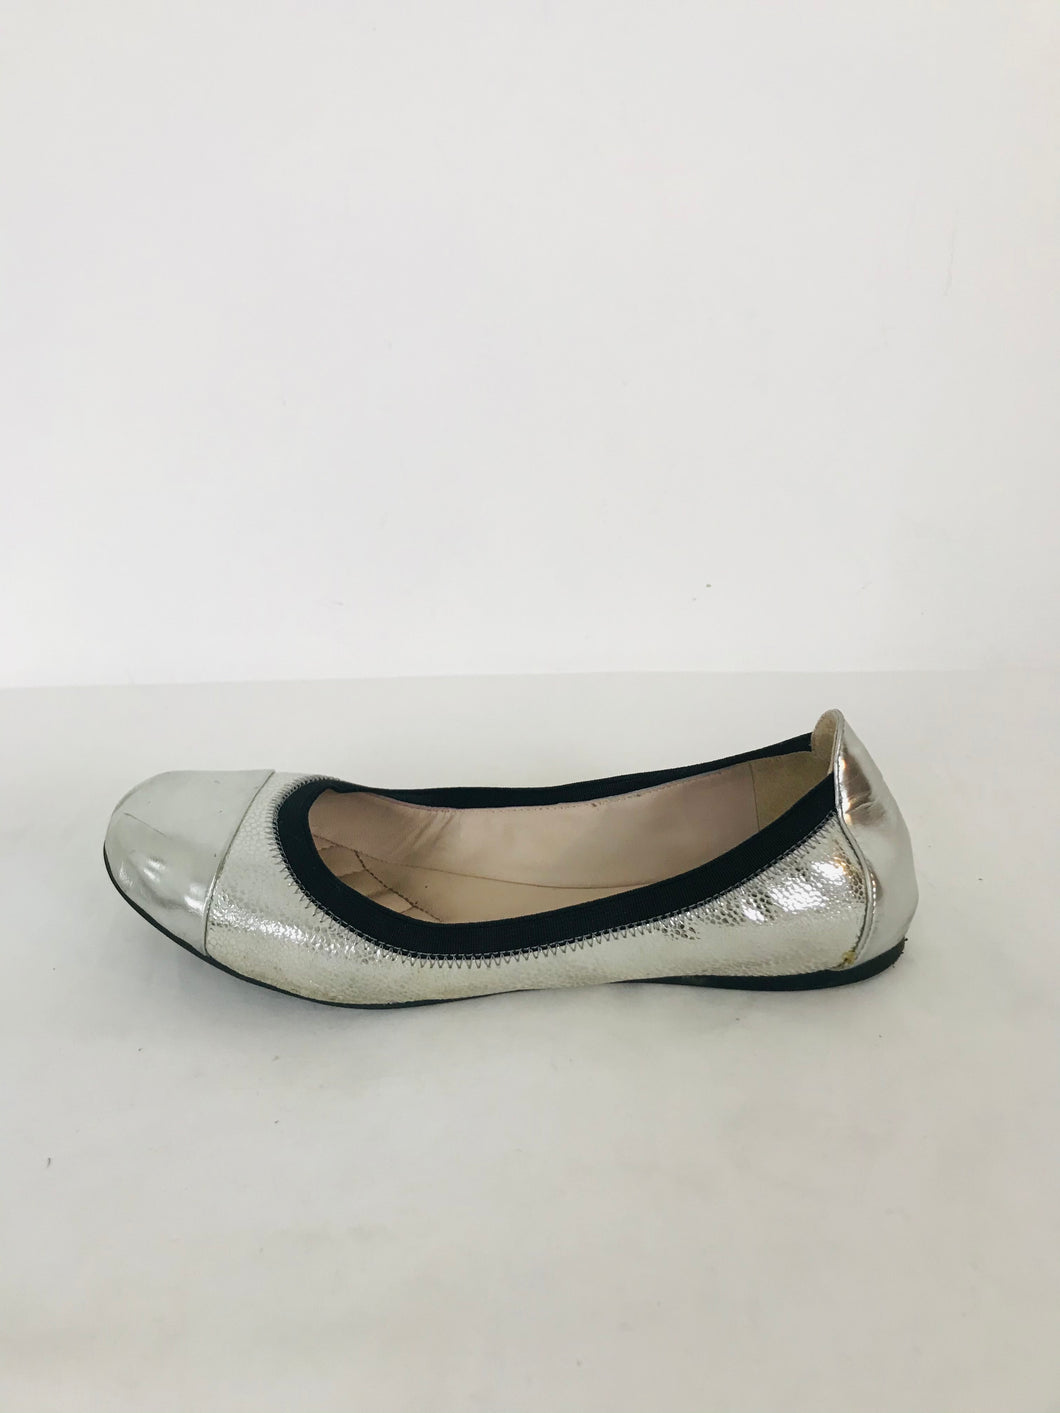 Vince Camuto Women’s Slip-On Ballet Shoes | 36 1/2 UK3.5 | Silver